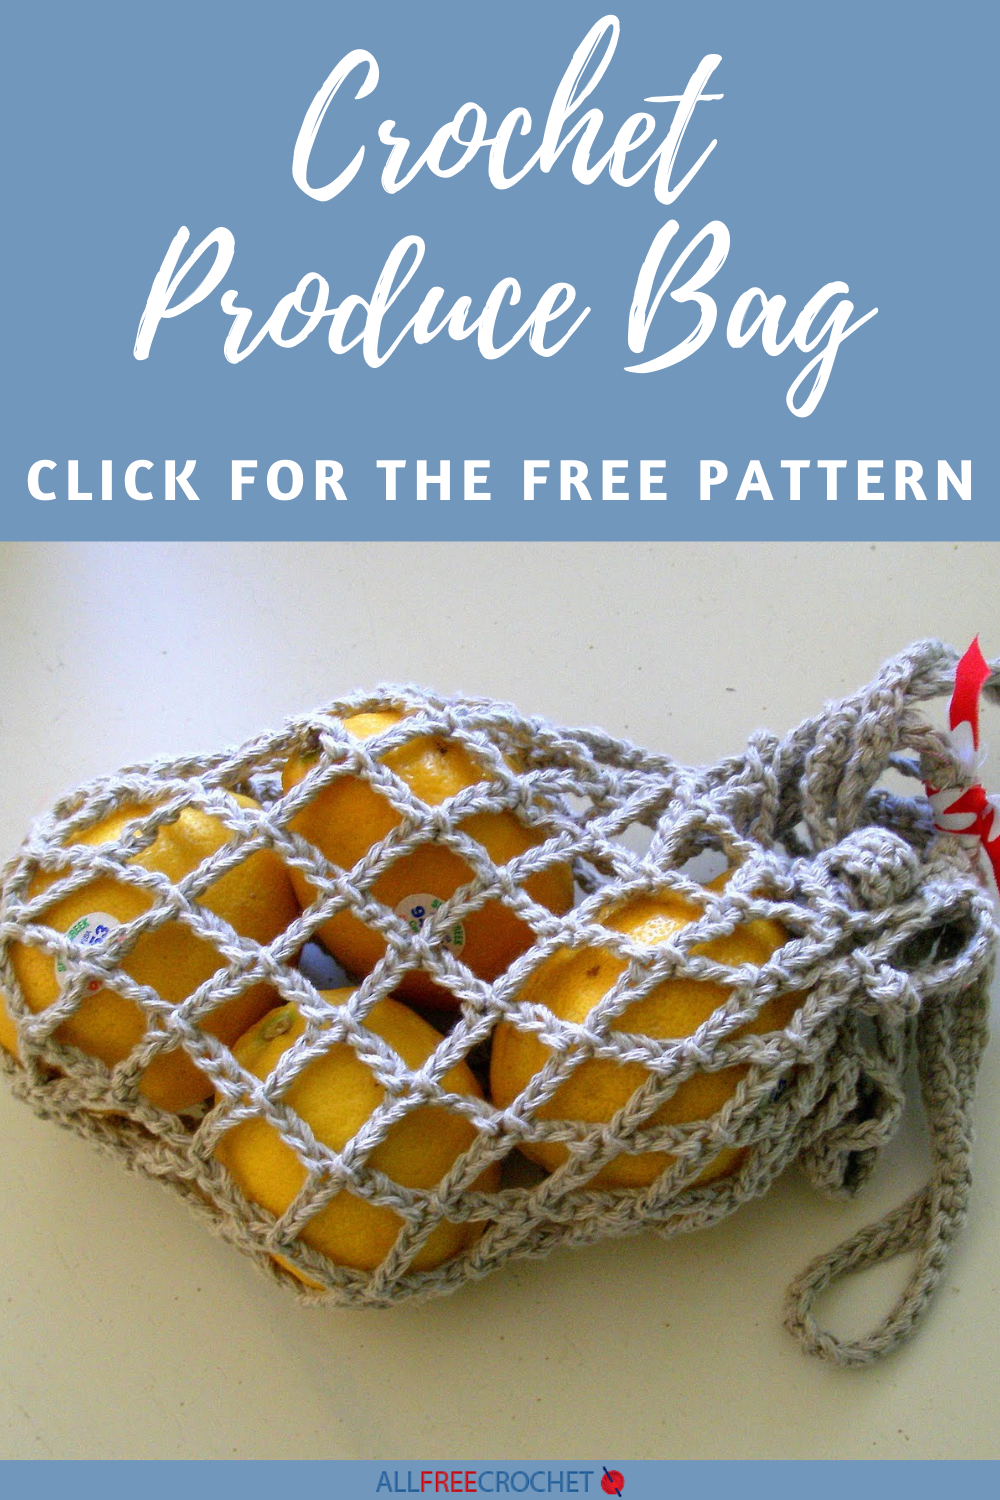 How to crochet a market bag - free pattern 